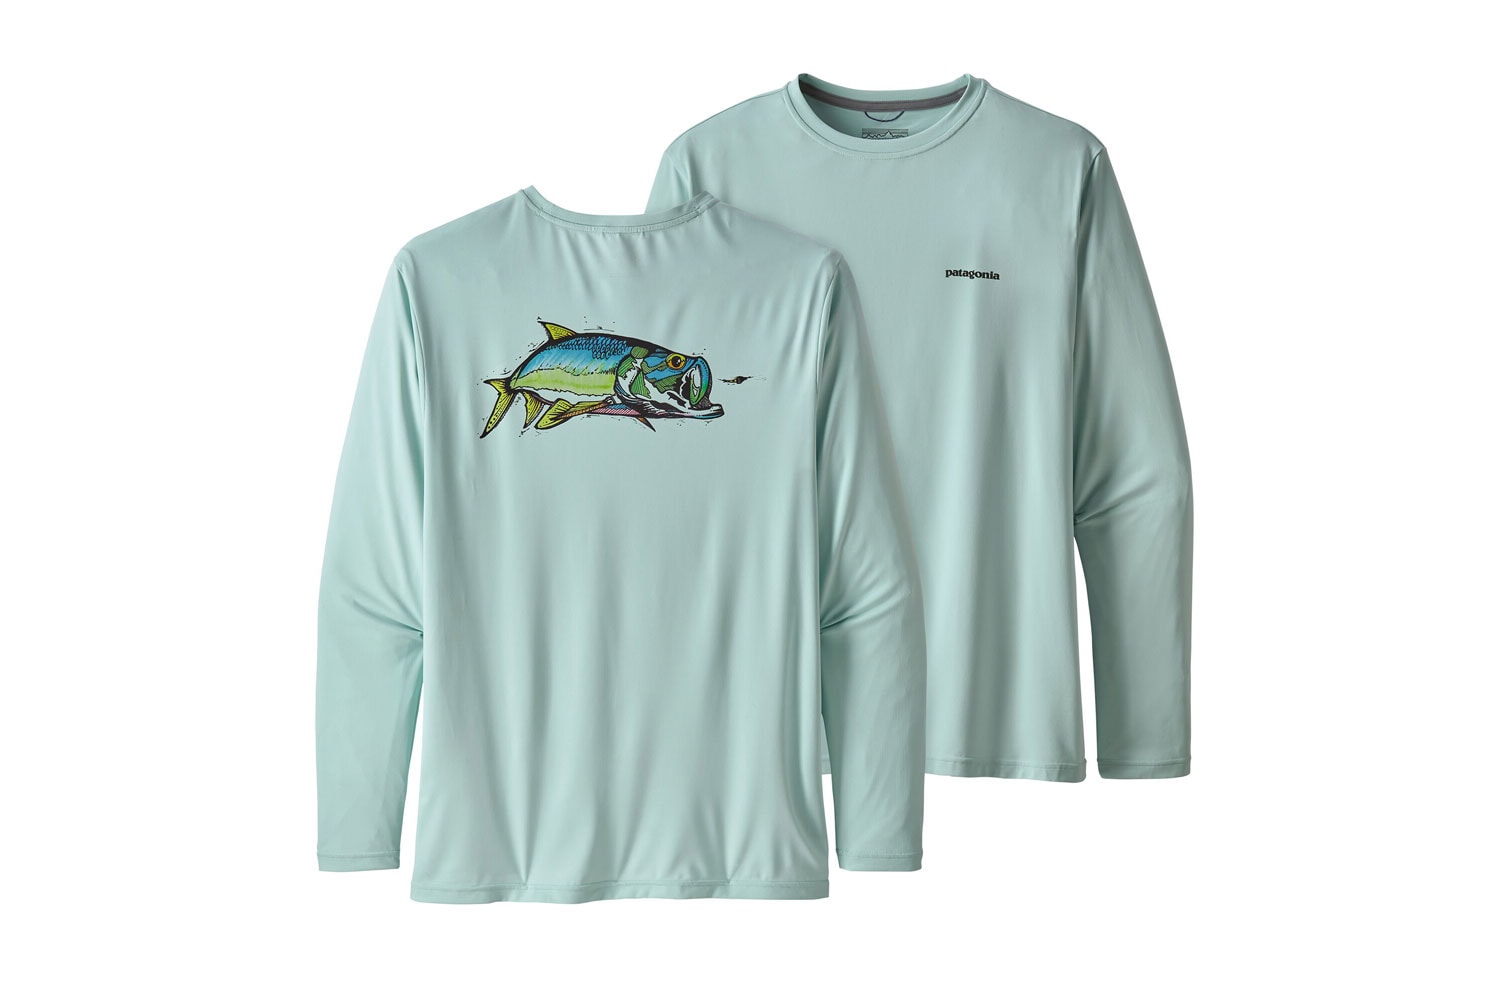 Patagonia Men's Graphic Tech Fish Tee 52146_EBDS - Duranglers Fly Fishing  Shop & Guides